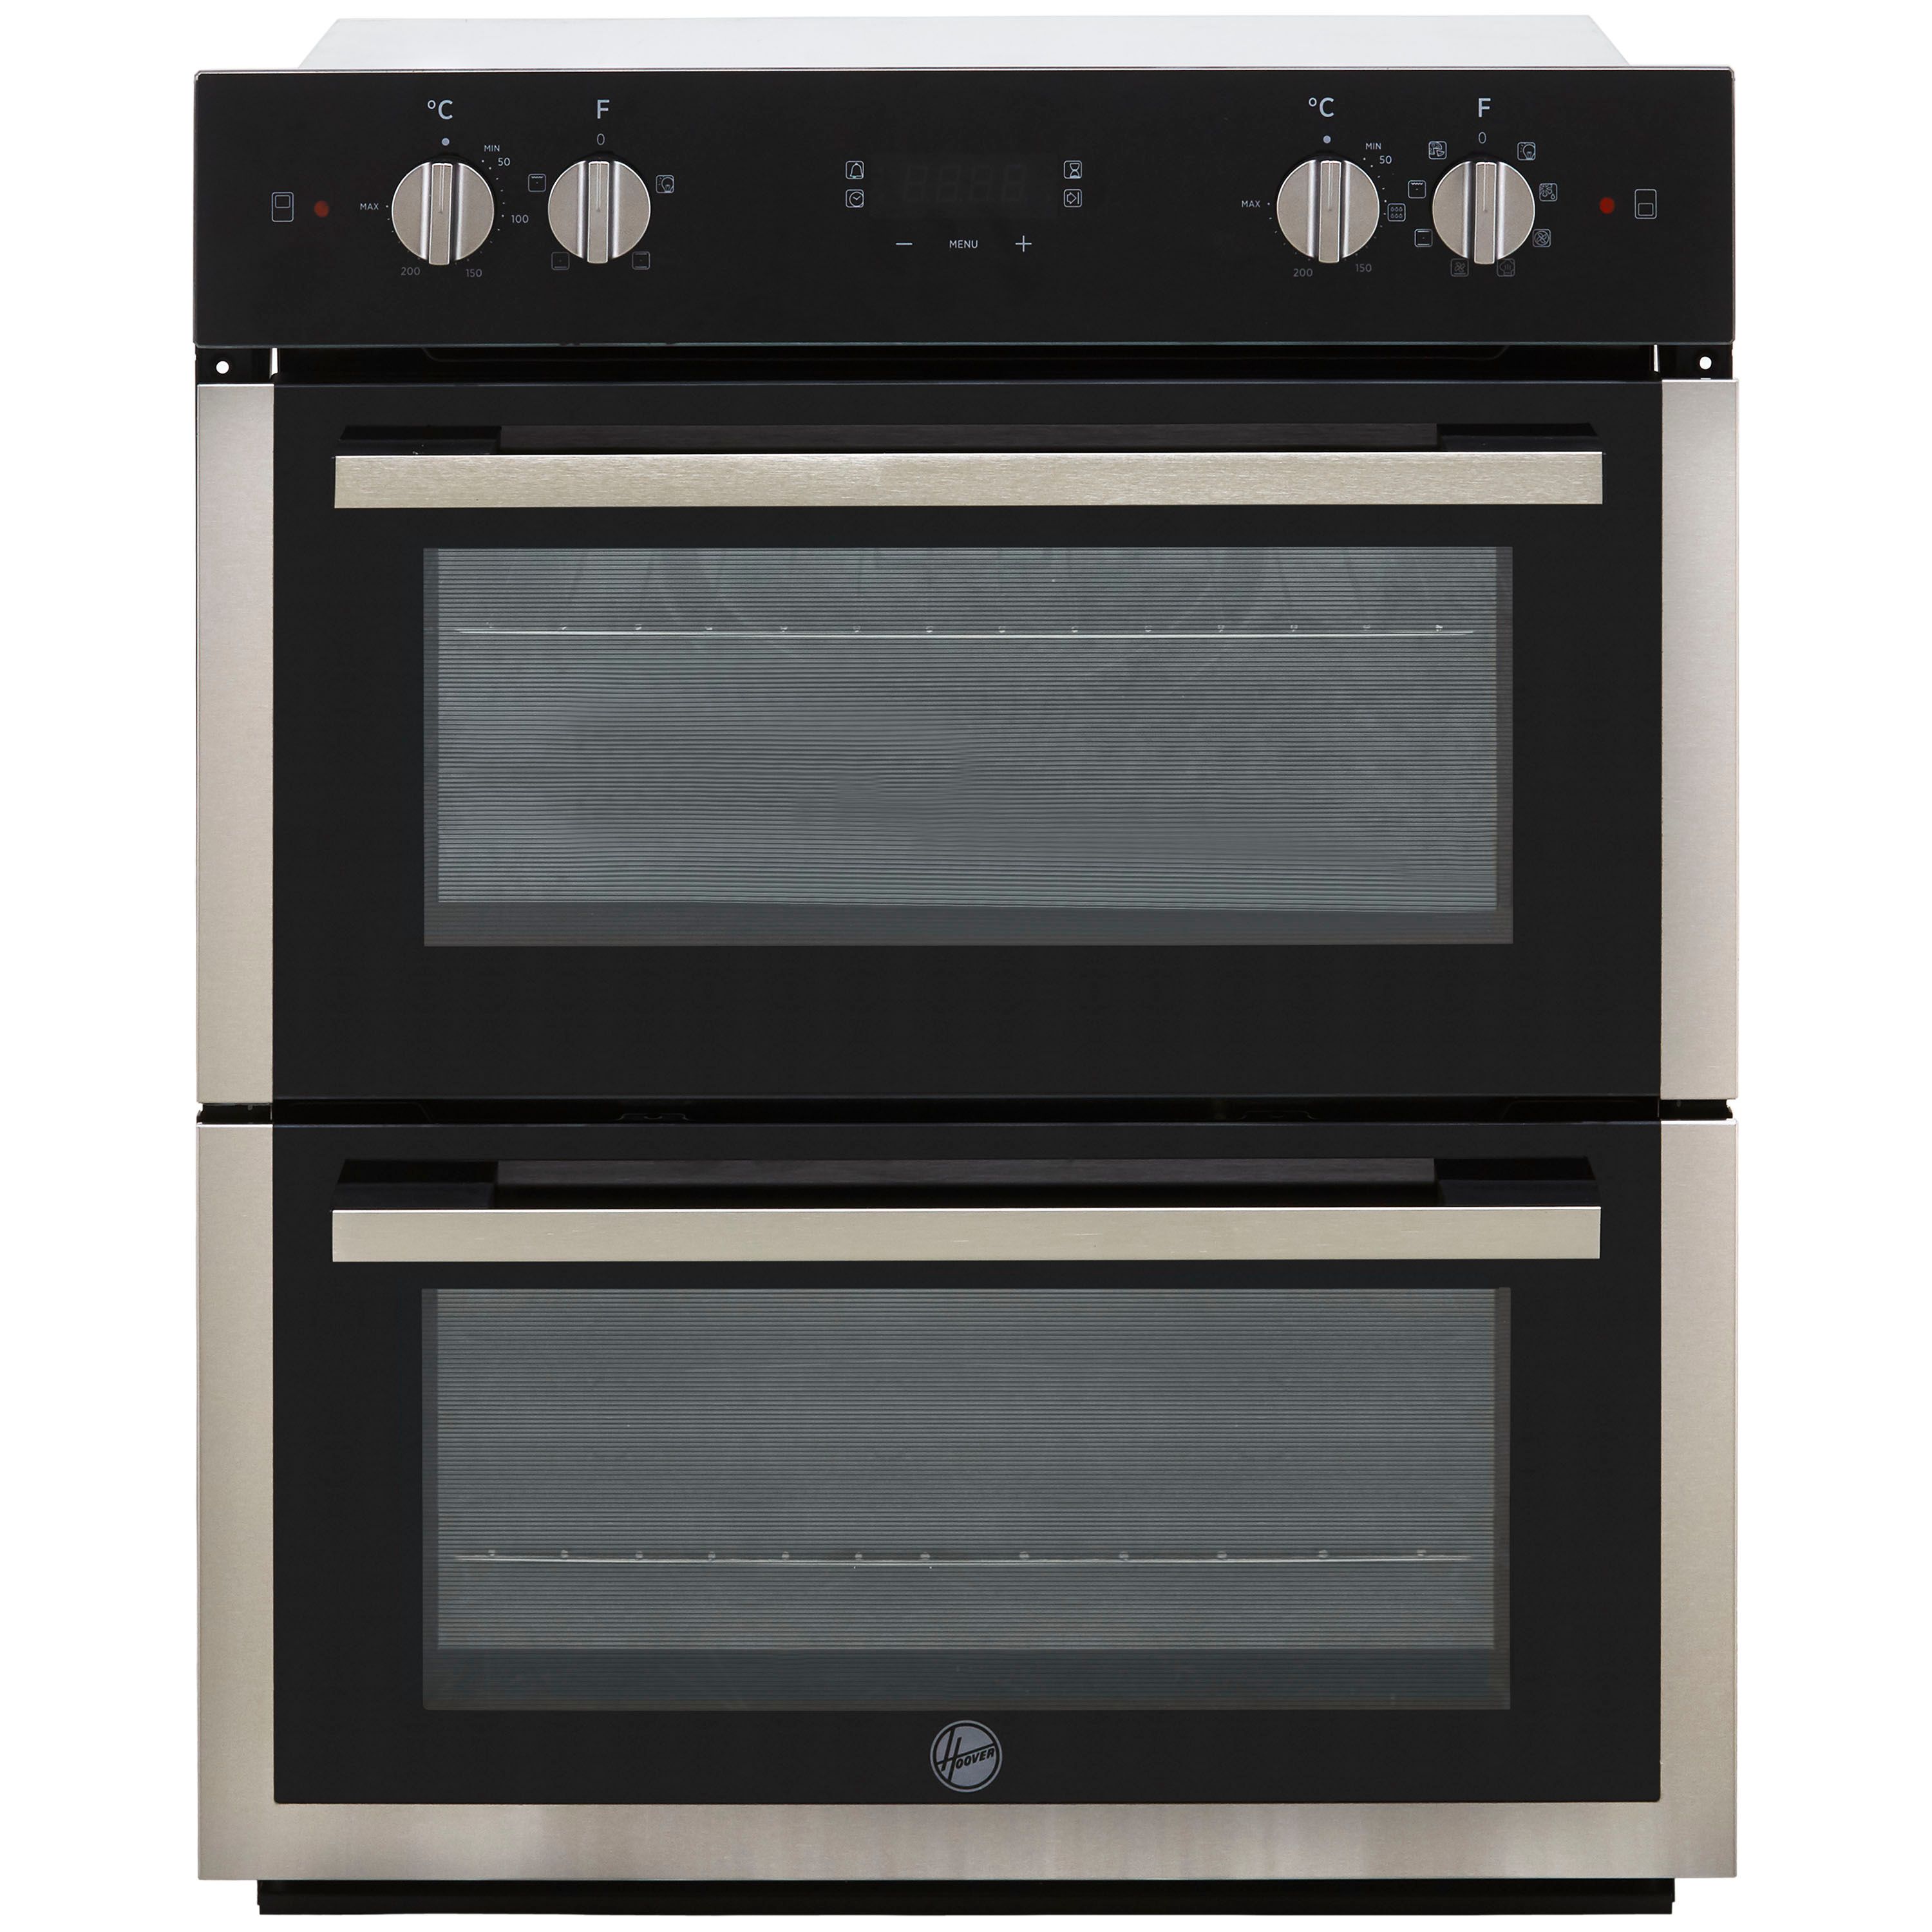 Hoover H-OVEN 300 HO7DC3UB308BI Built Under Electric Double Oven - Black / Stainless Steel - A/A Rated, Black